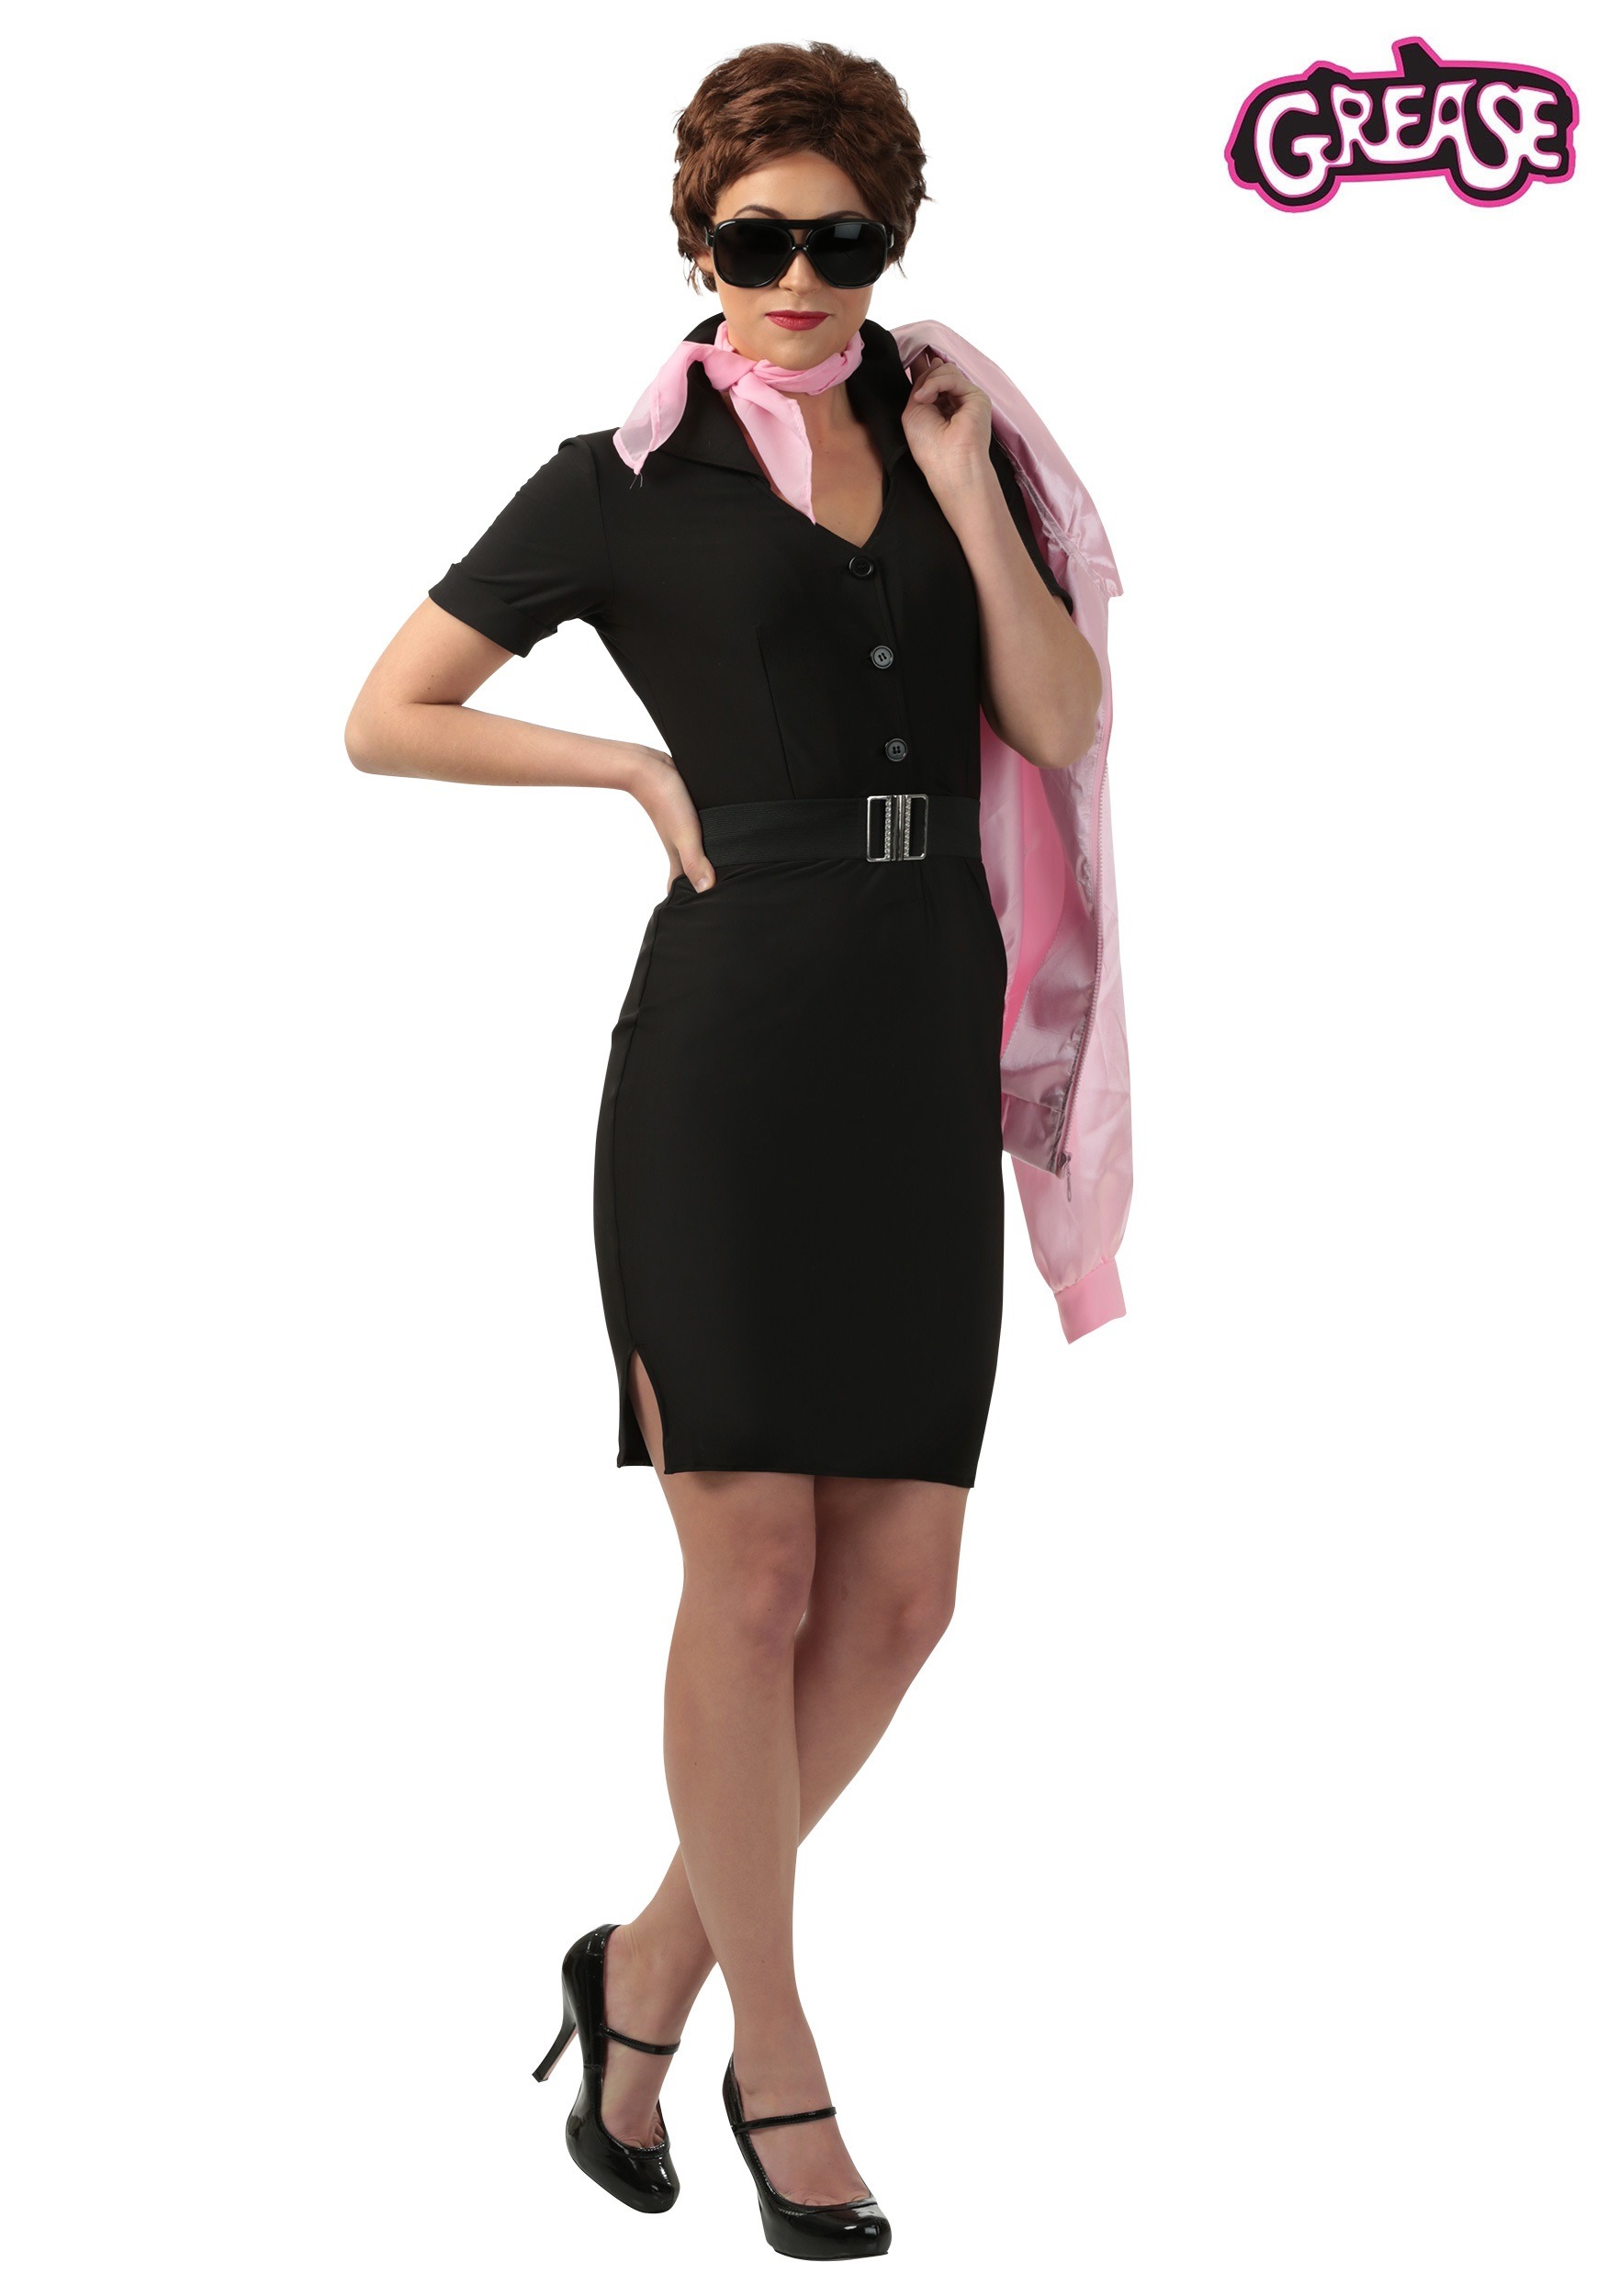 Grease Rizzo Costume for Women. nehru jacket louis philippe. 